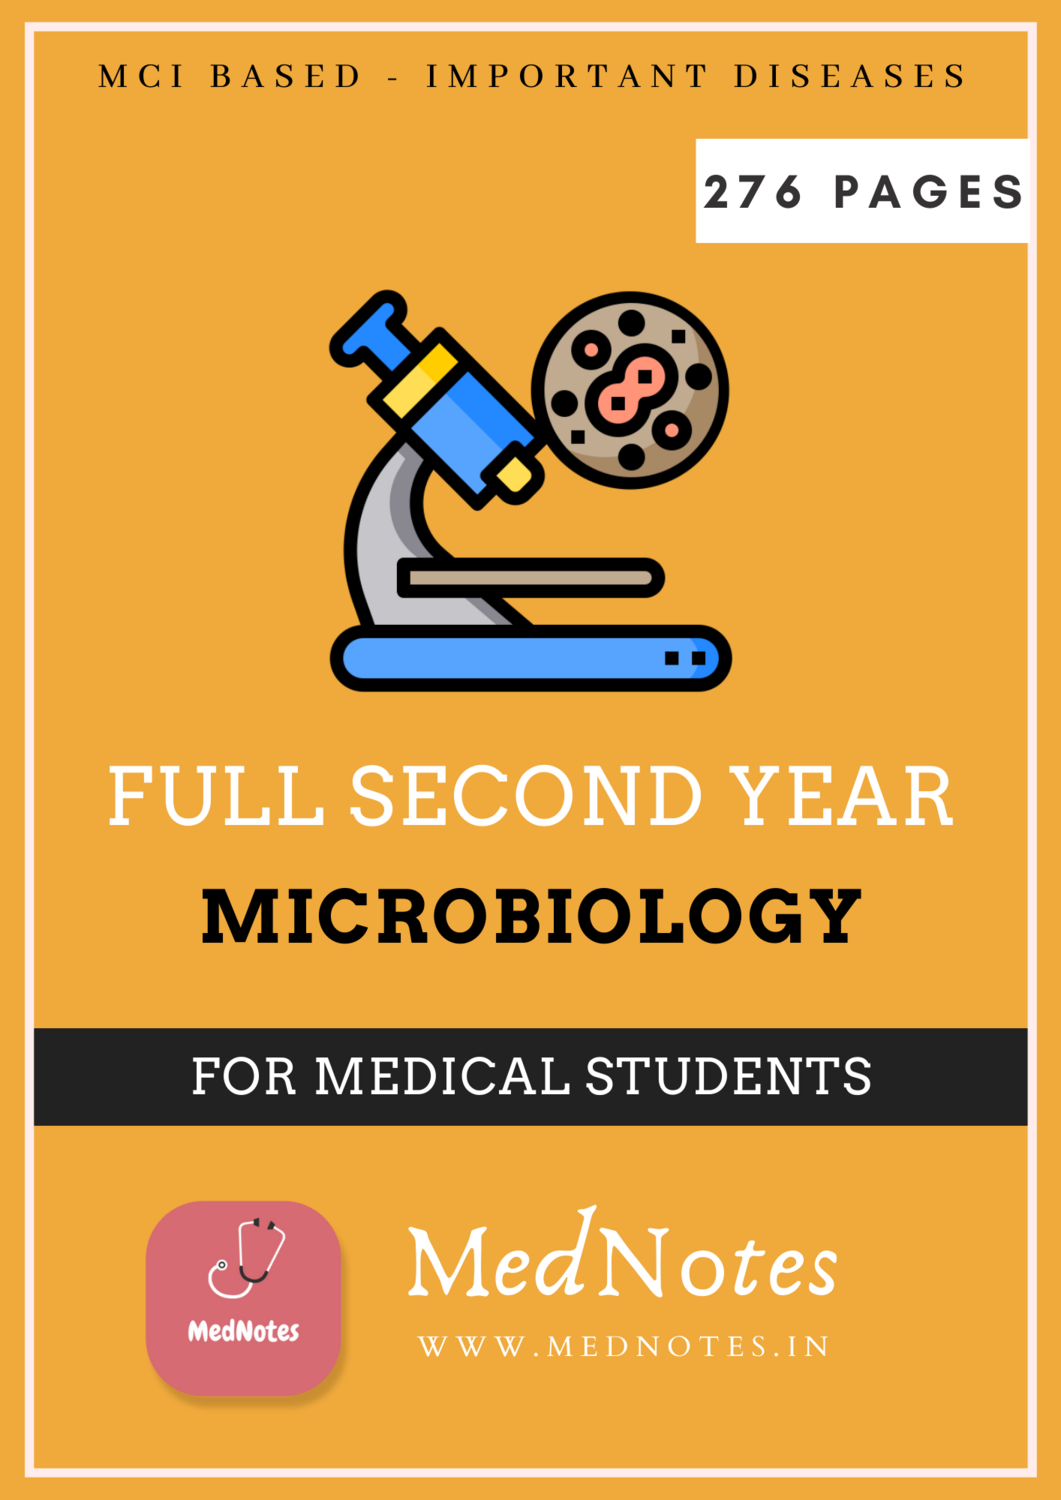 Full Second Year Microbiology - MedNotes Ebook